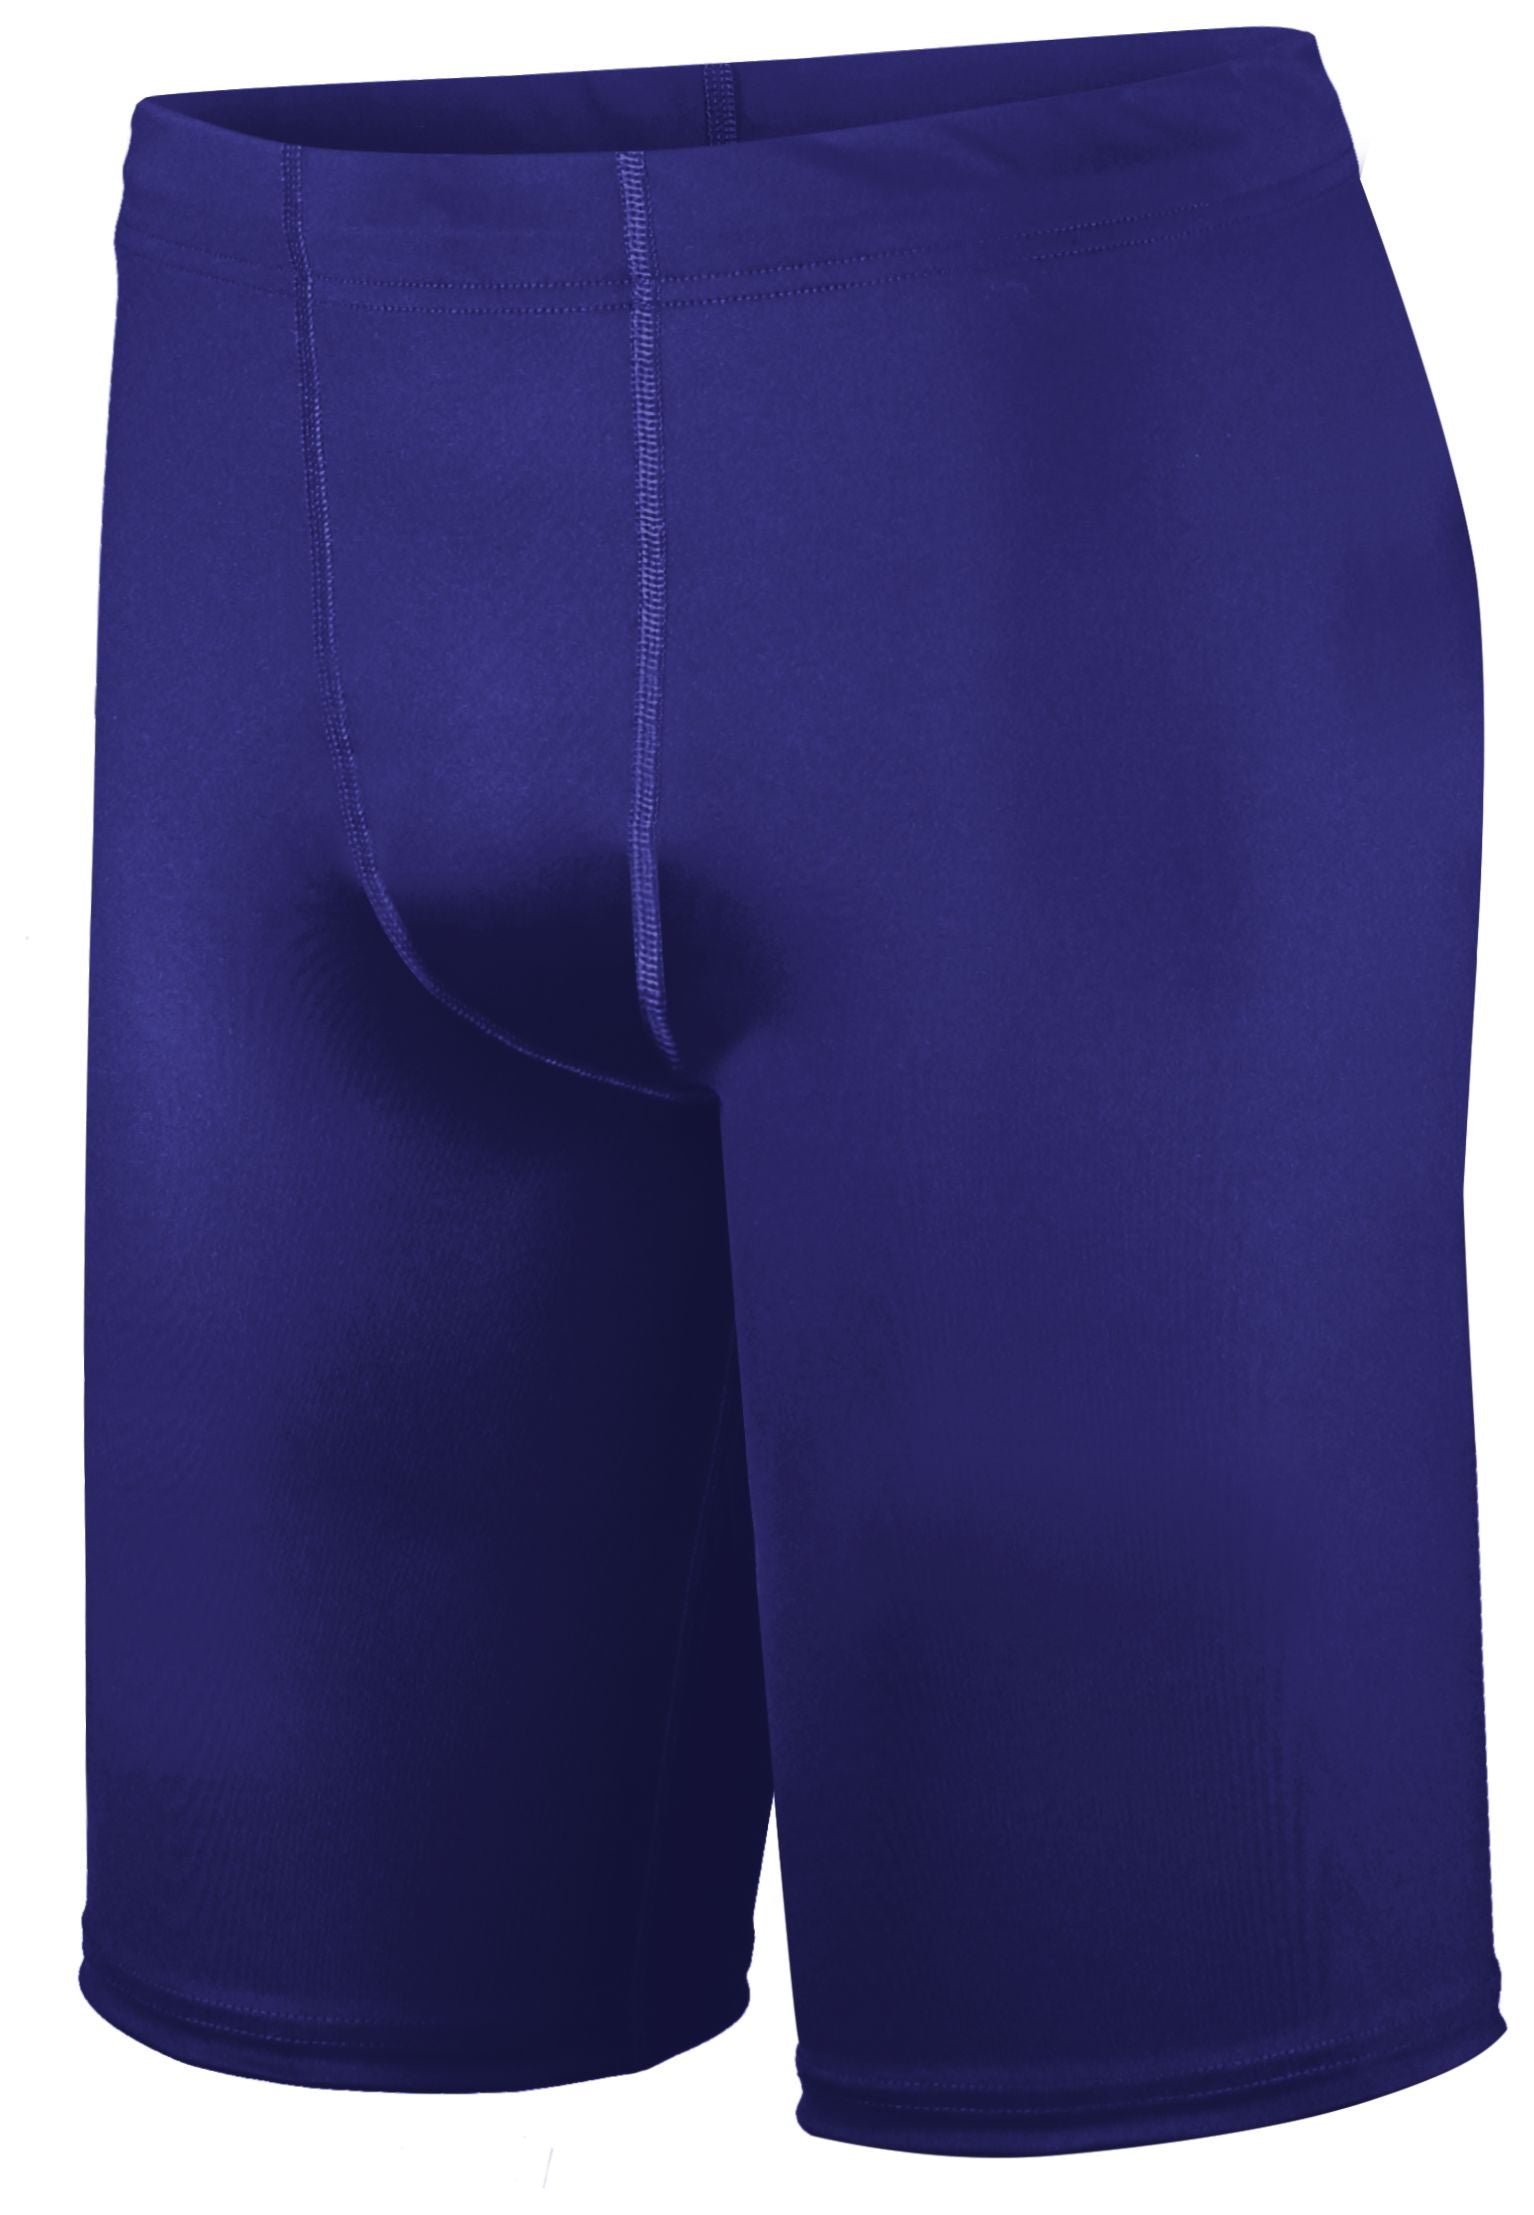 Holloway Pr Max Compression Shorts in Purple (Hlw)  -Part of the Adult, Adult-Shorts, Track-Field, Holloway product lines at KanaleyCreations.com